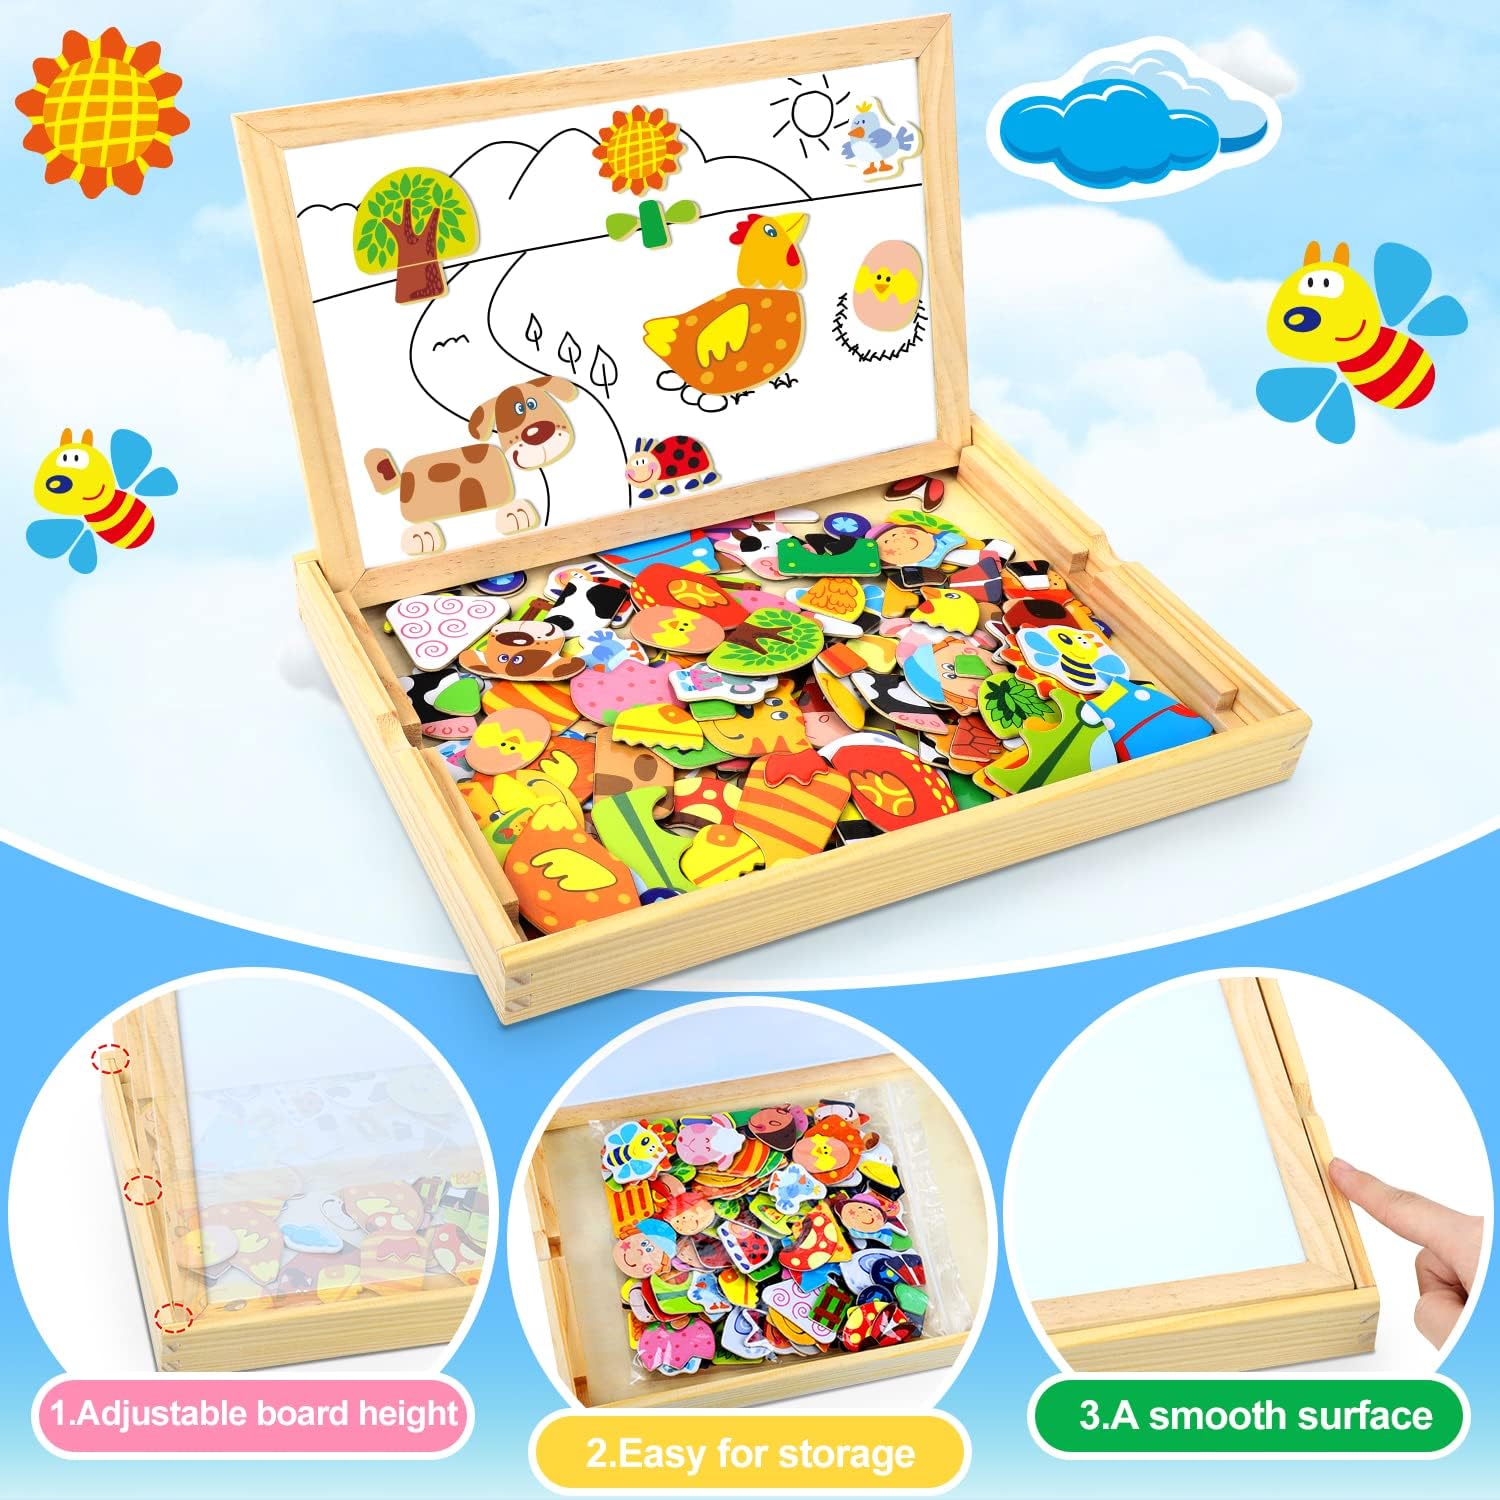 Wooden Magnetic Board Puzzle Games + Chalkboard